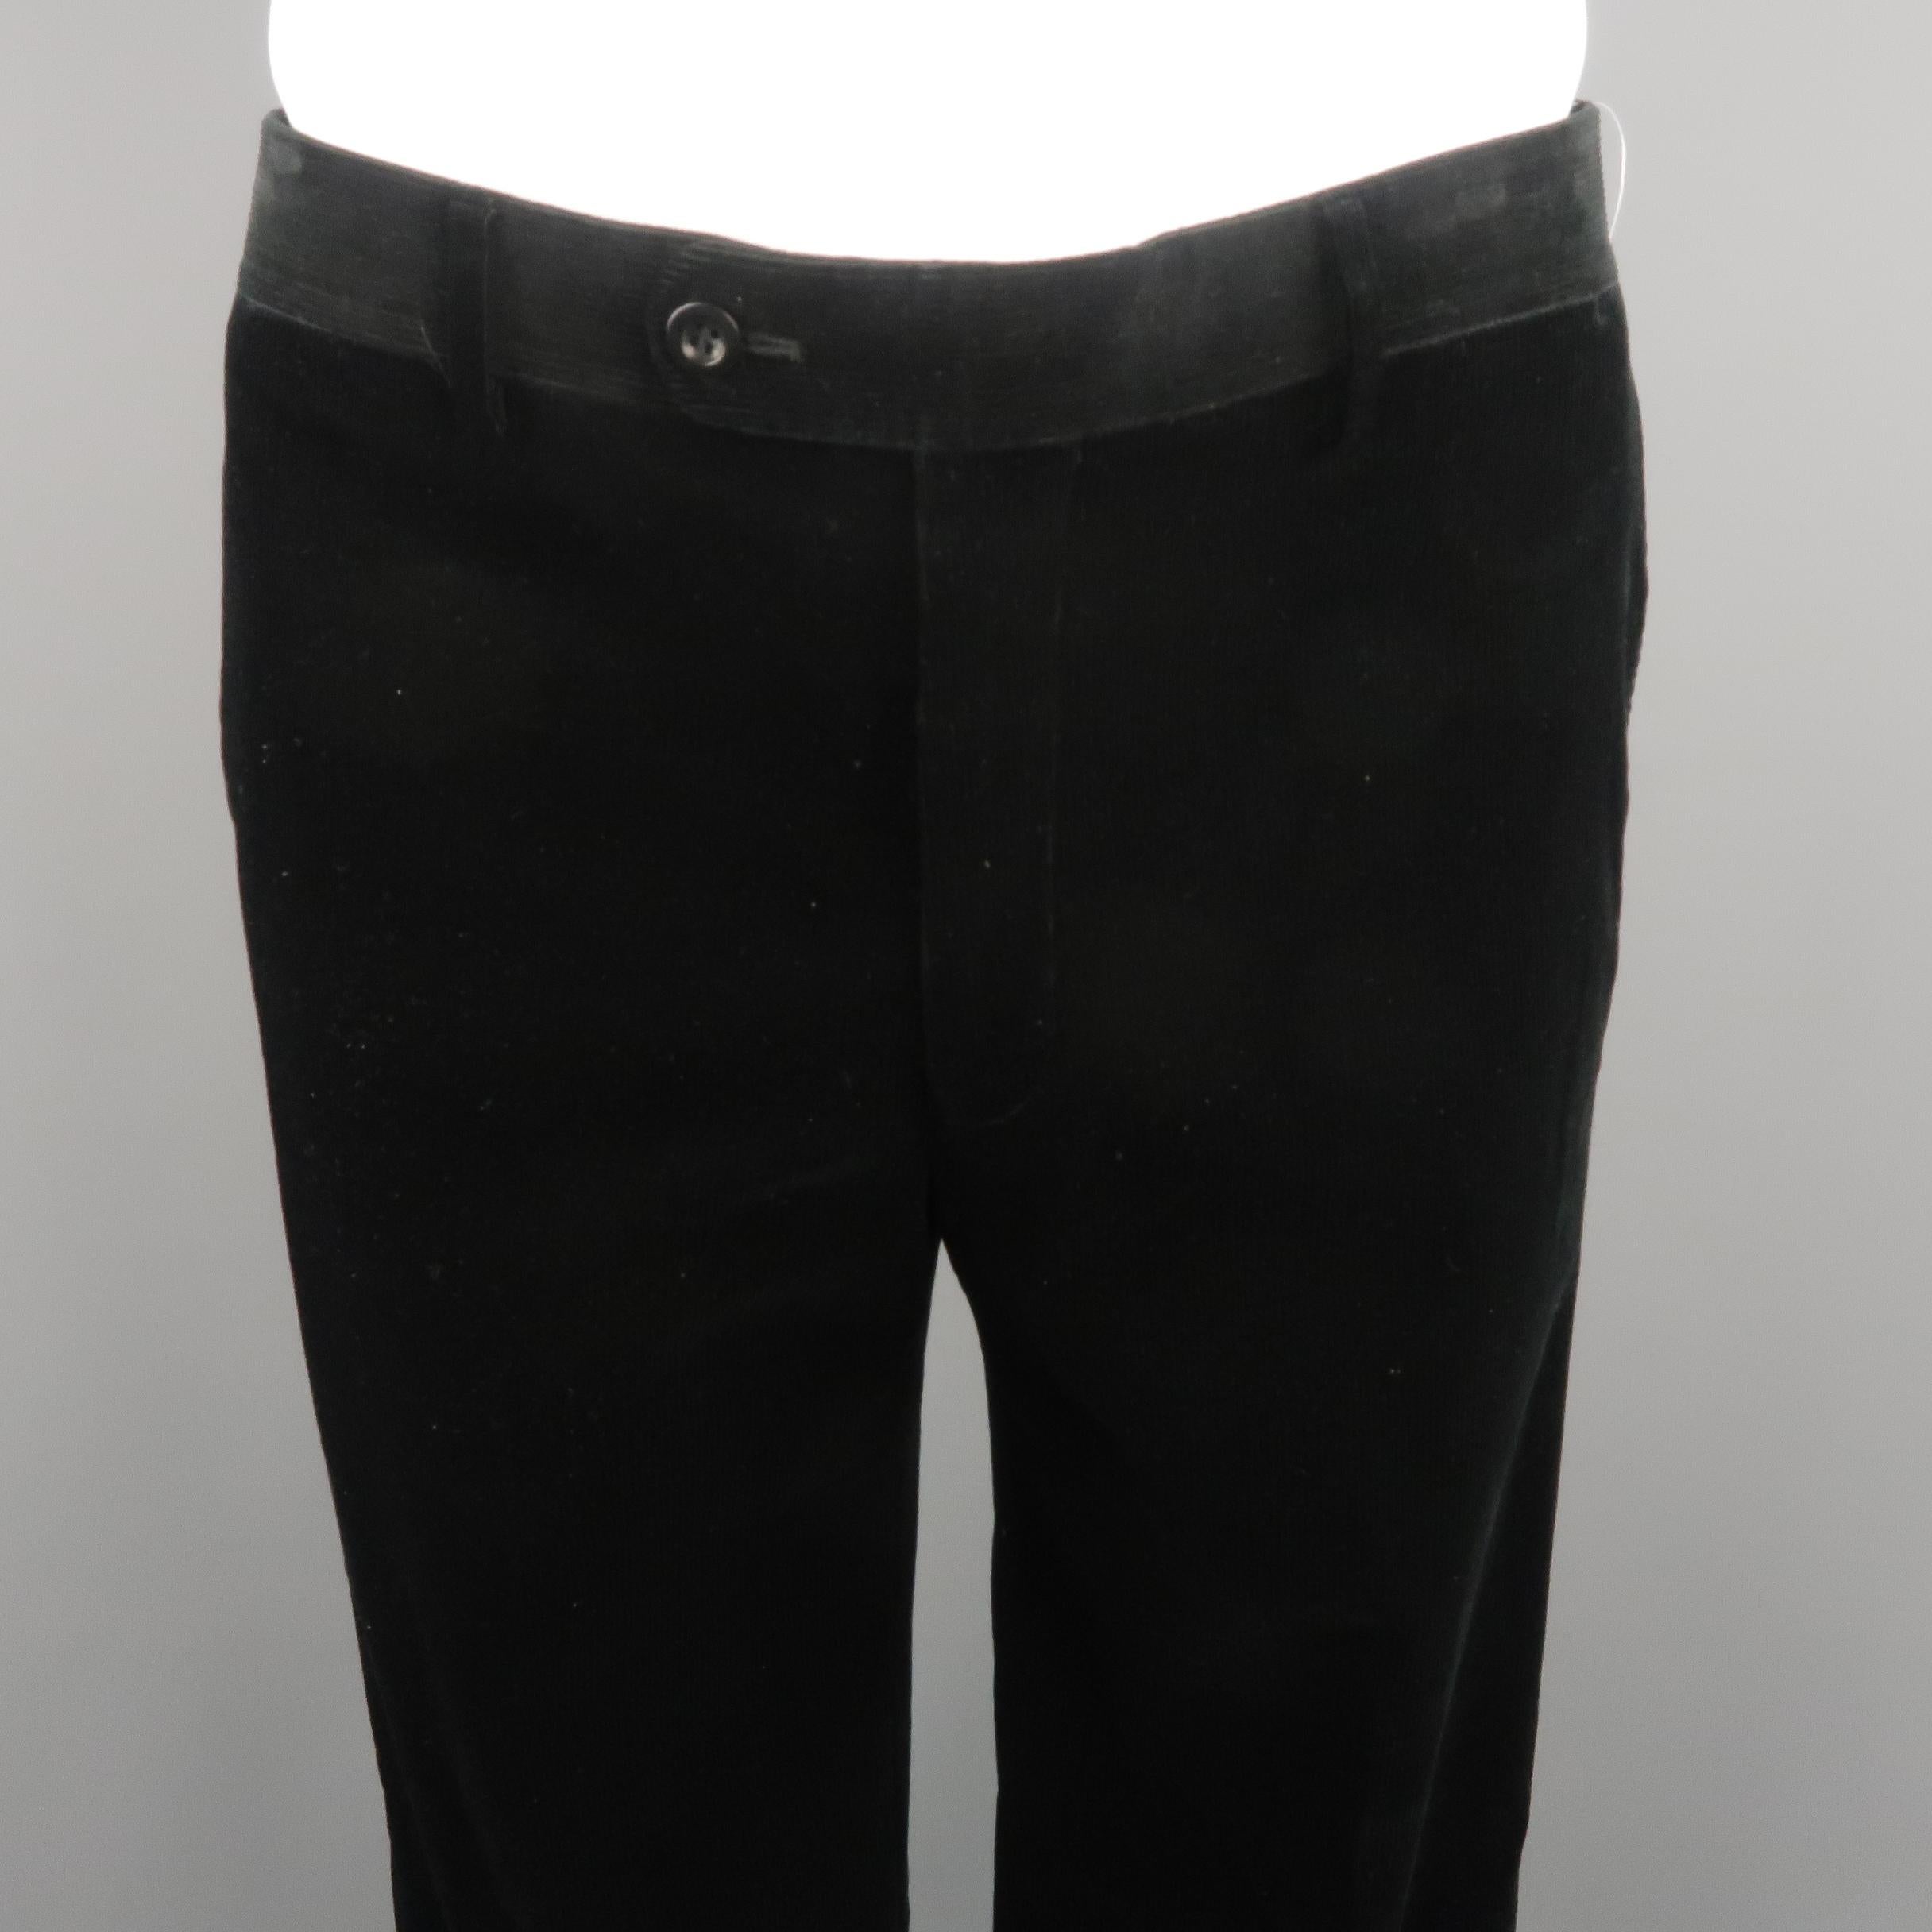 HERMES dress pants come in black tone corduroy, with front tab and piped pockets. Minor stains inside on the lining, dry clean removable. Made in Italy.
 
Excellent Pre-Owned Condition.
Marked: No size
 
Measurements:
 
Waist: 36 in.
Rise: 10.5